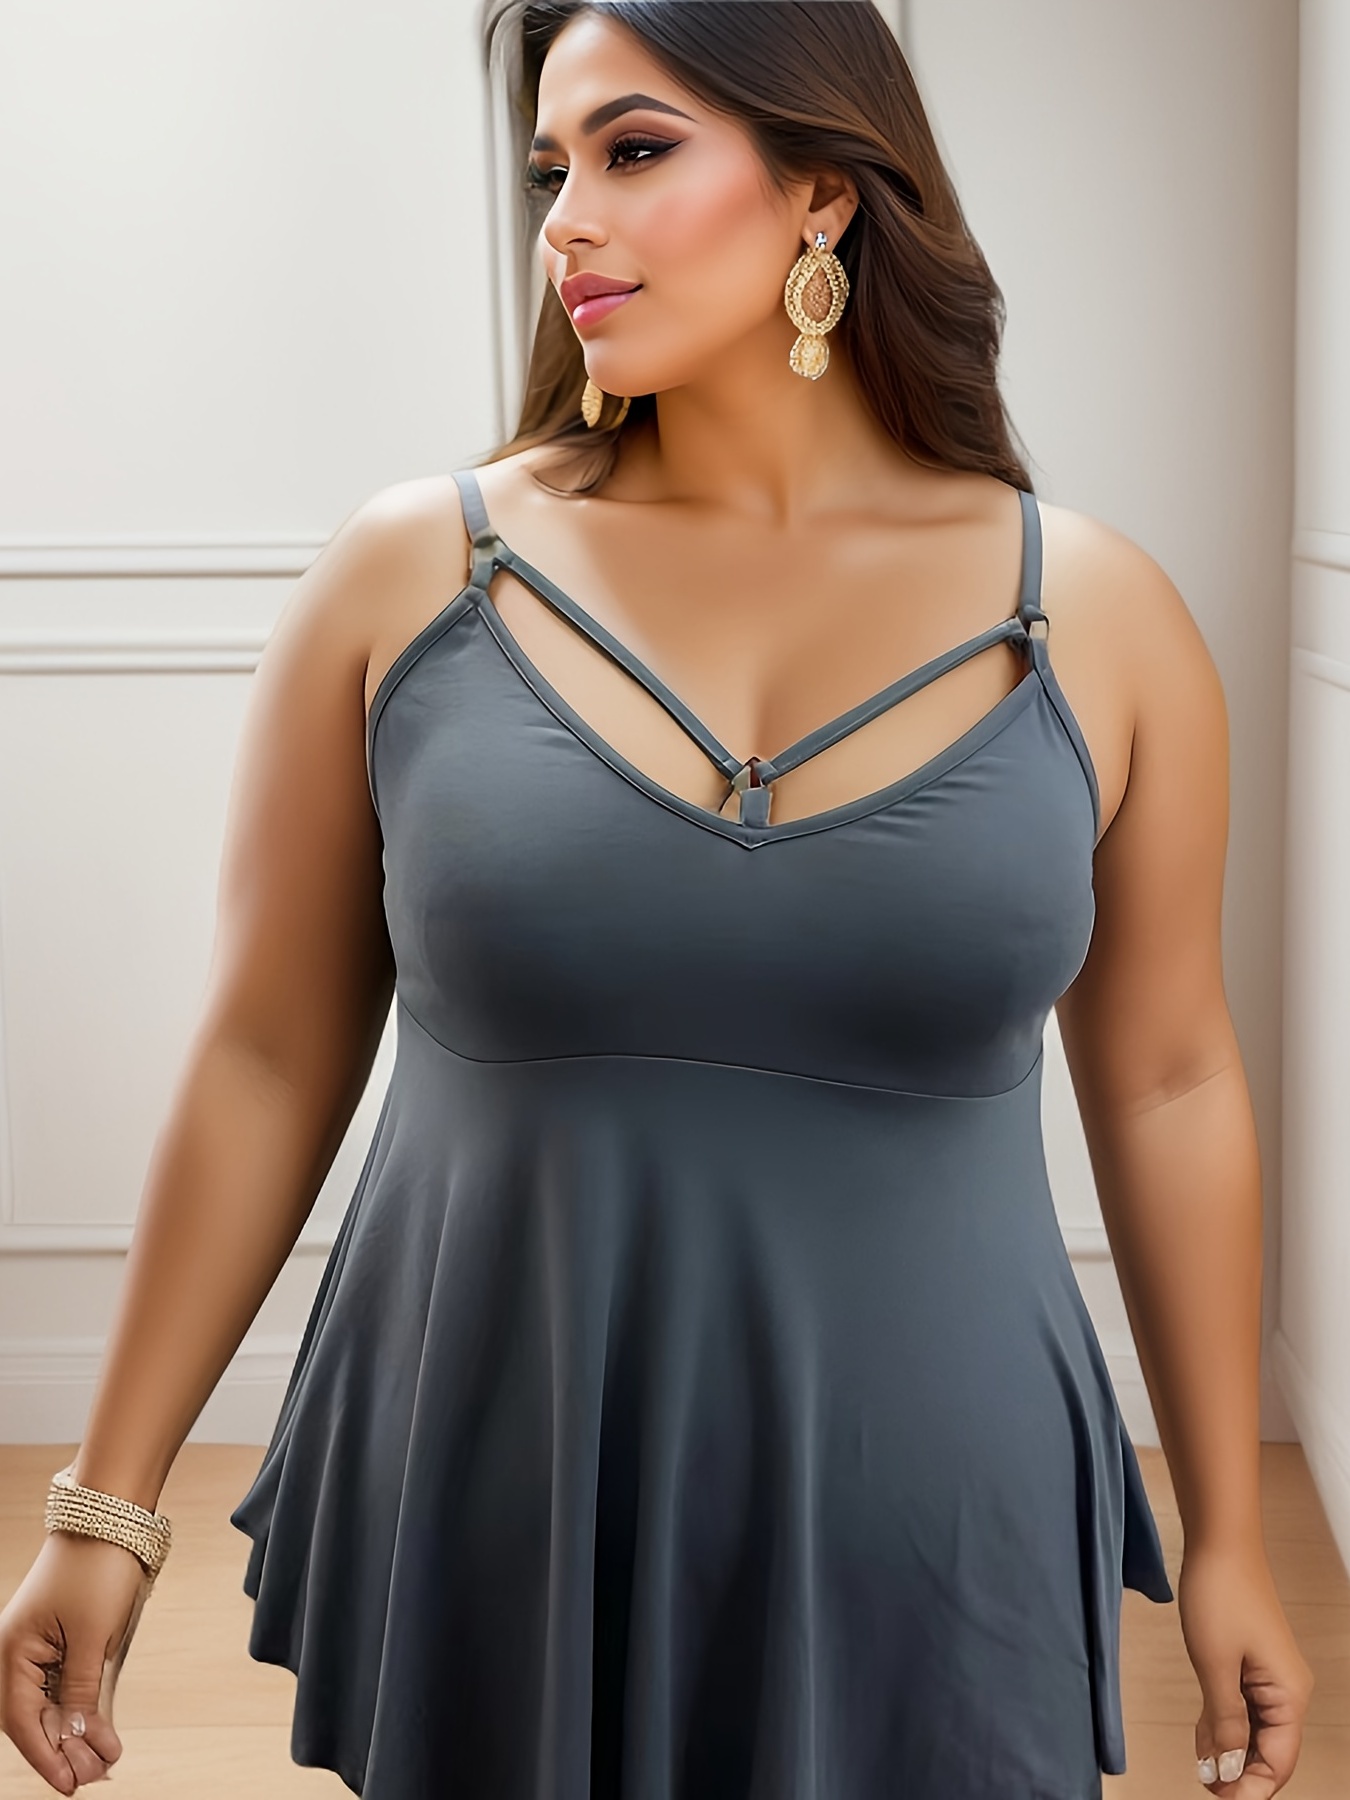 PMUYBHF Lace Camisoles for Women for under Clothes Plus Size